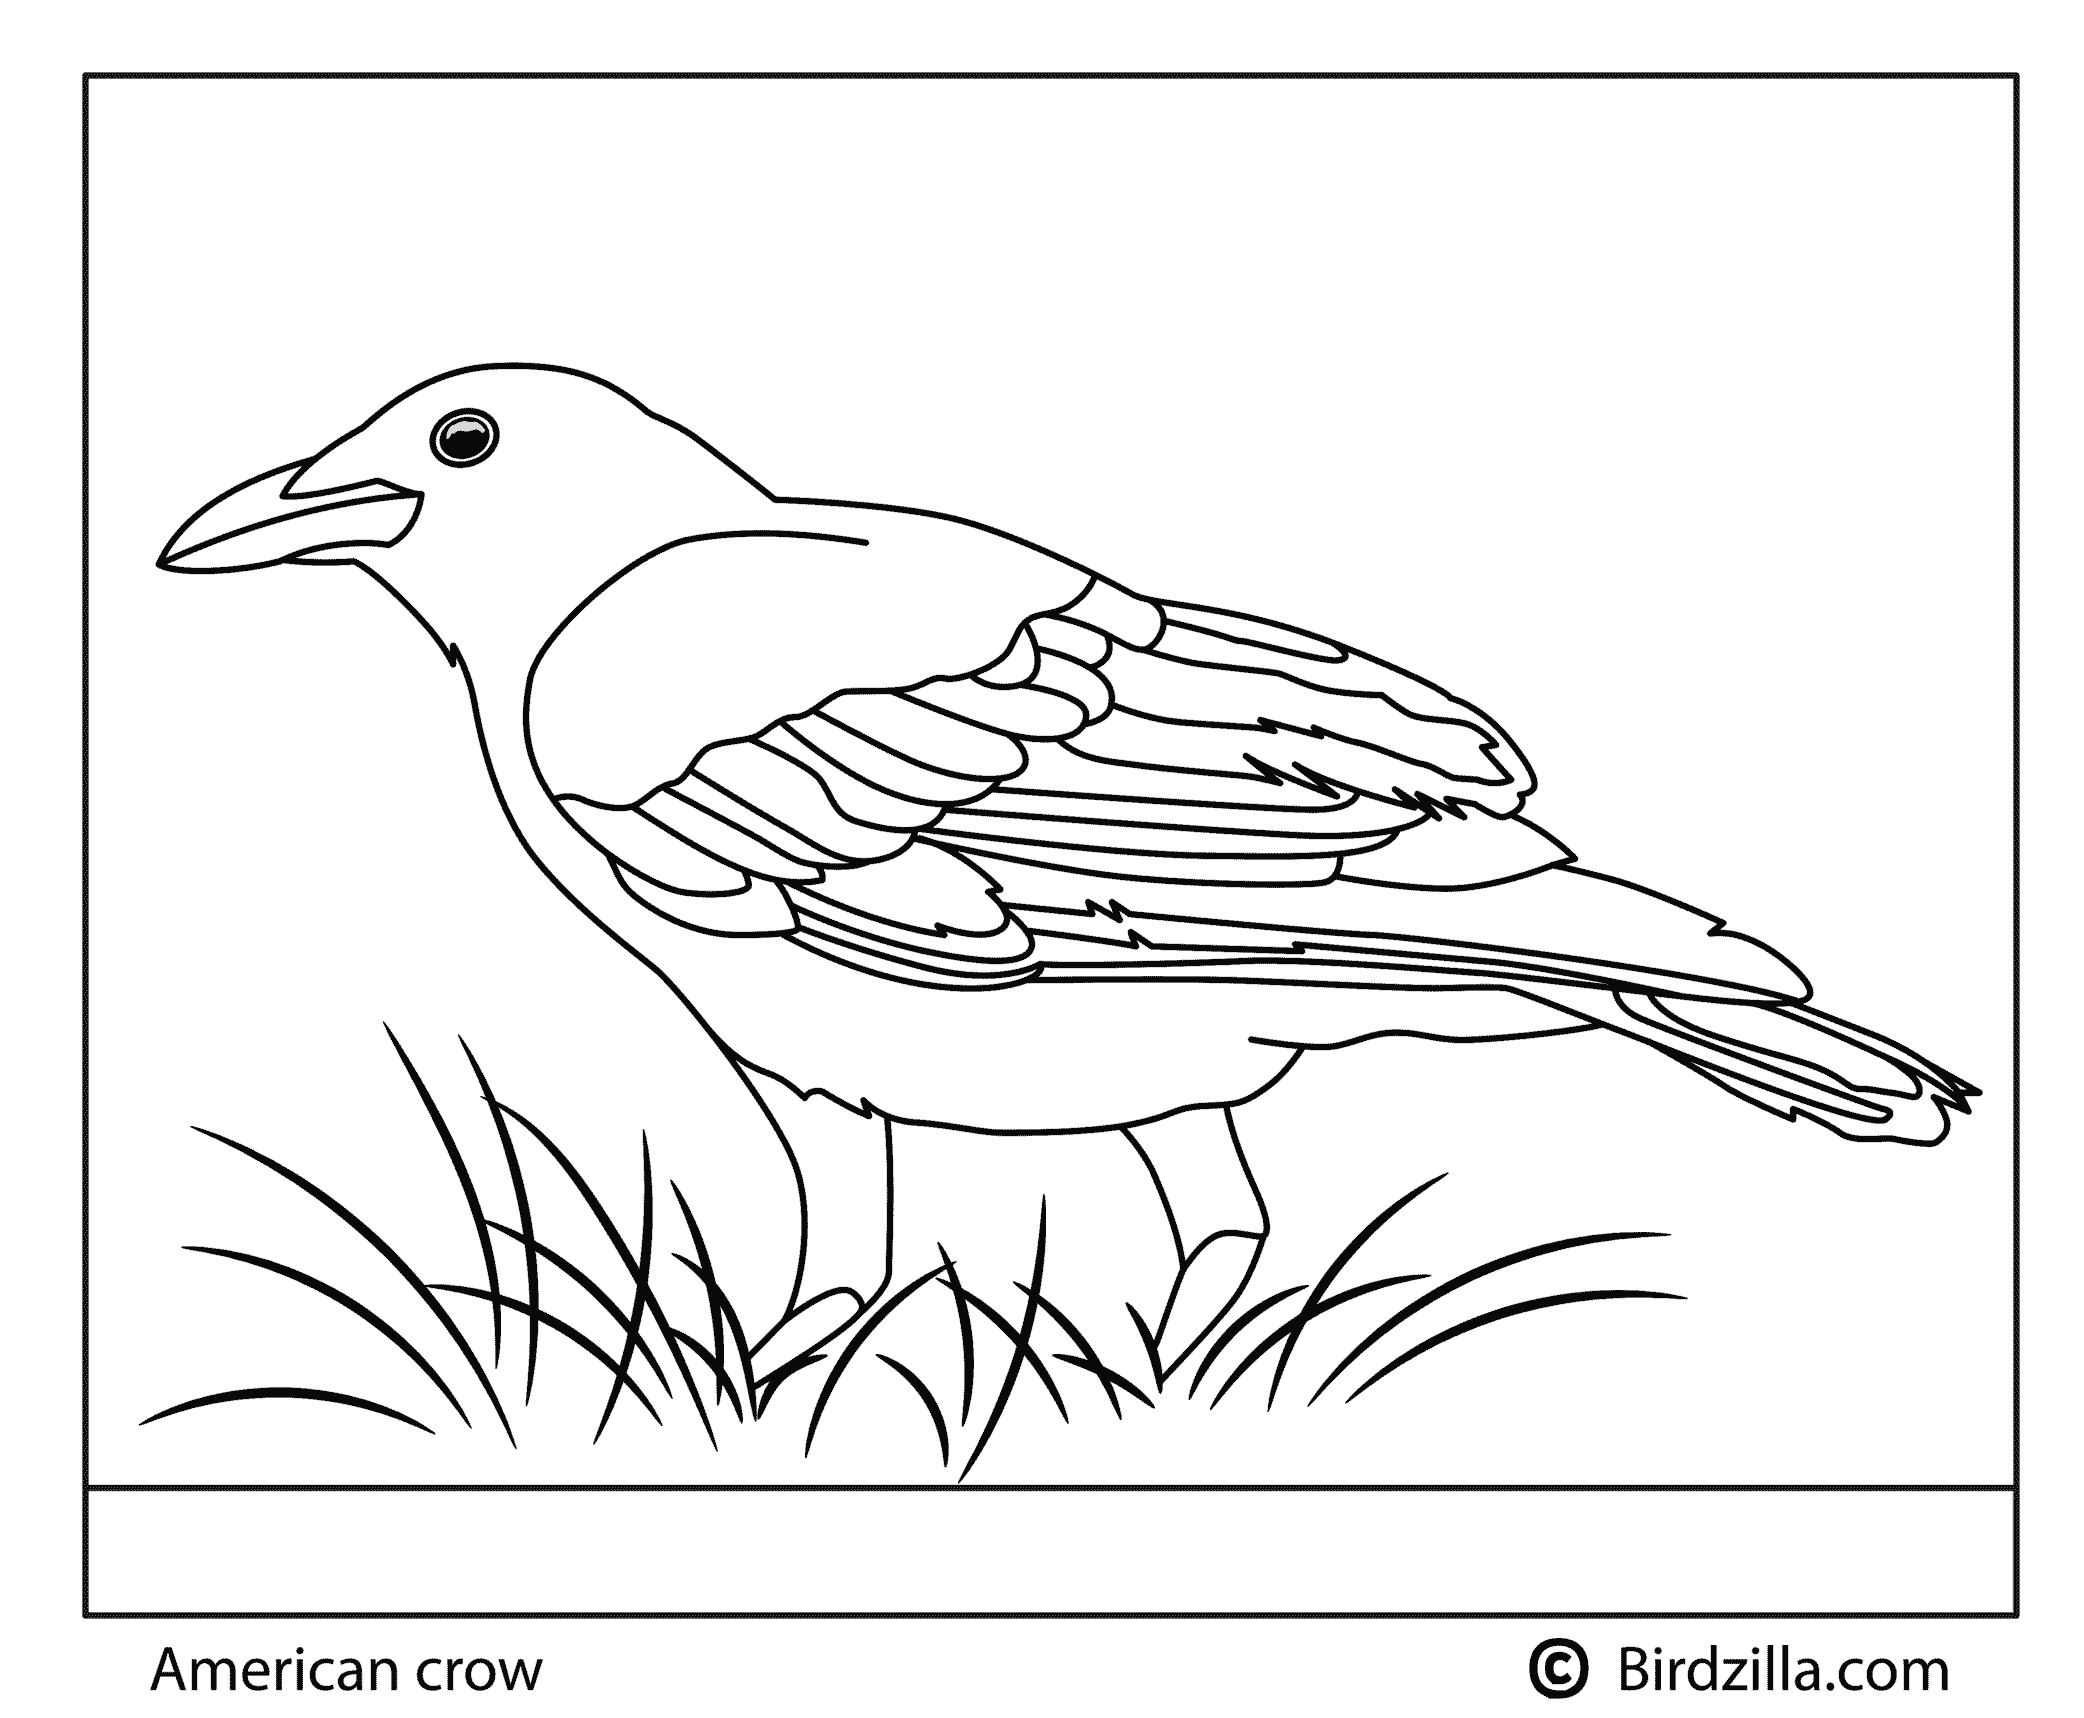 American Crow coloring page